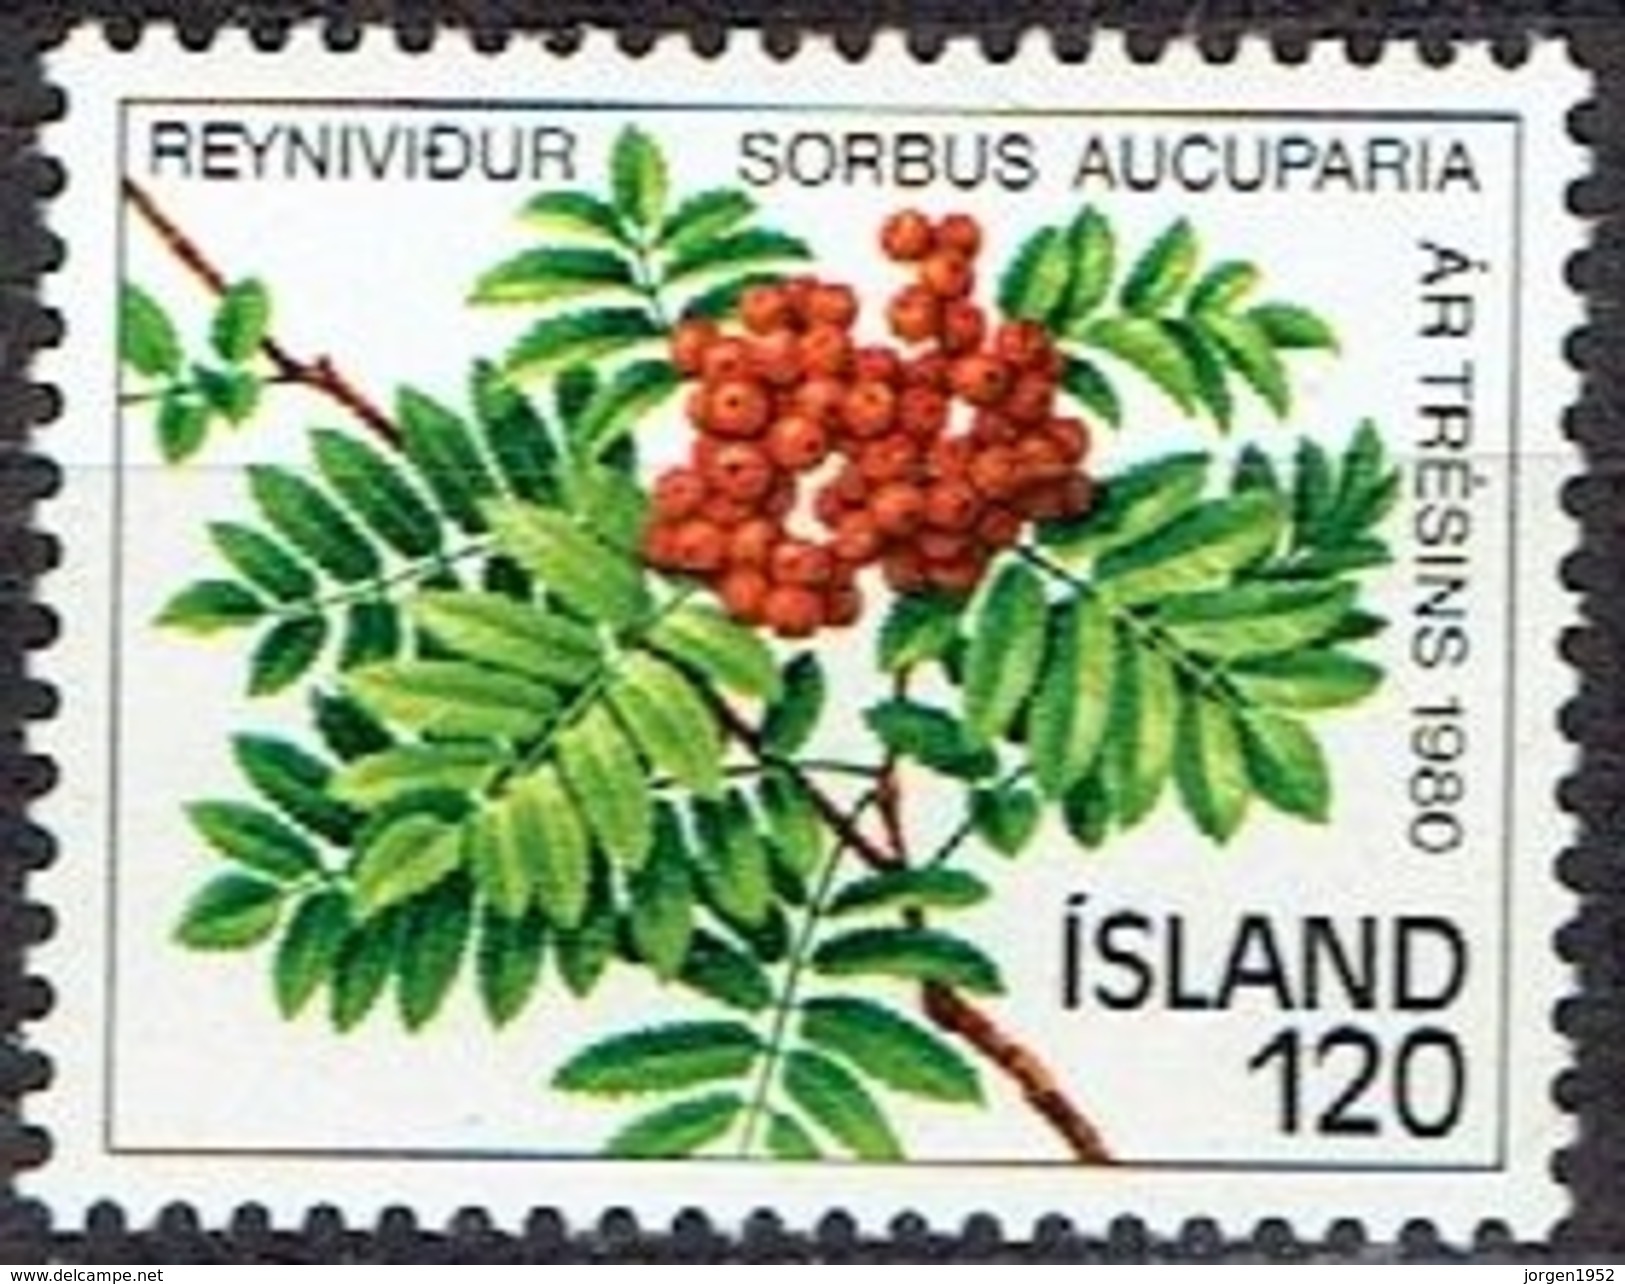 ICELAND #  FROM 1980  STAMPWORLD 555** - Nuevos